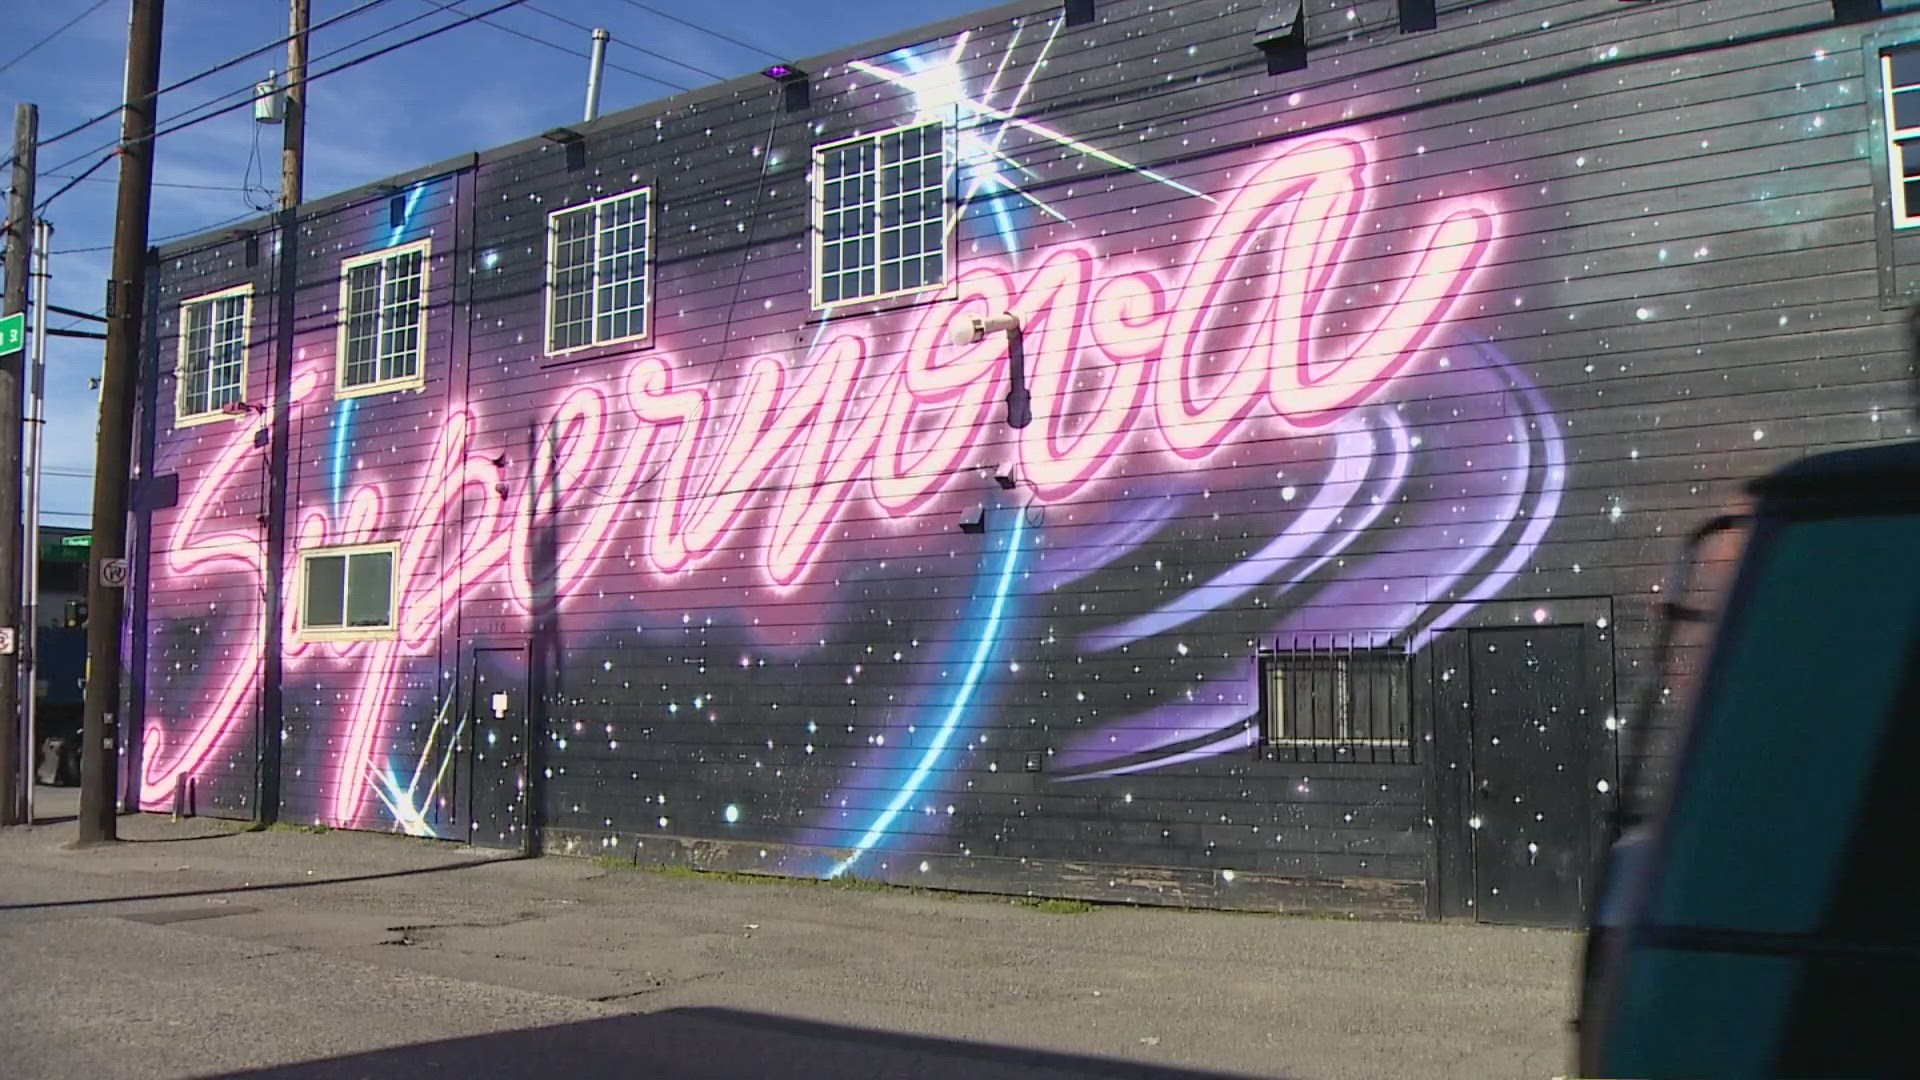 Supernova Seattle said it will start featuring fully nude female dancers next weekend. But the Liquor & Cannabis Board said it "does not have provisions" to do that.